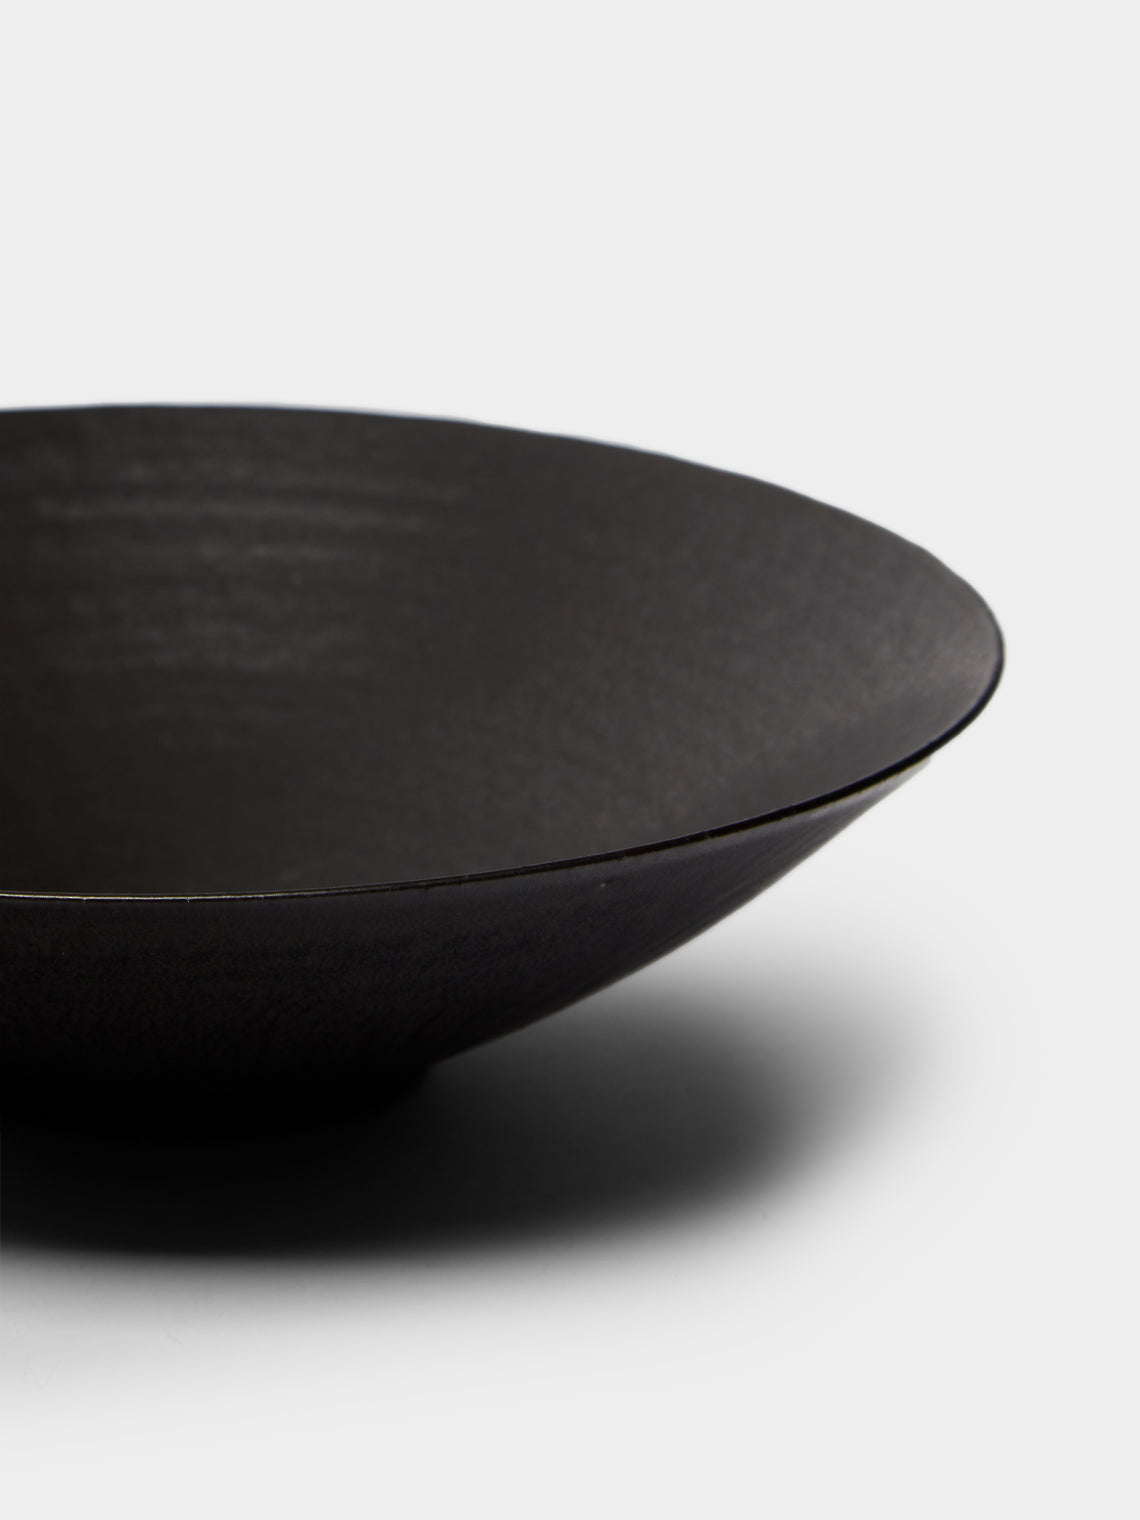 Lee Song-am - Black Clay Serving Bowl -  - ABASK